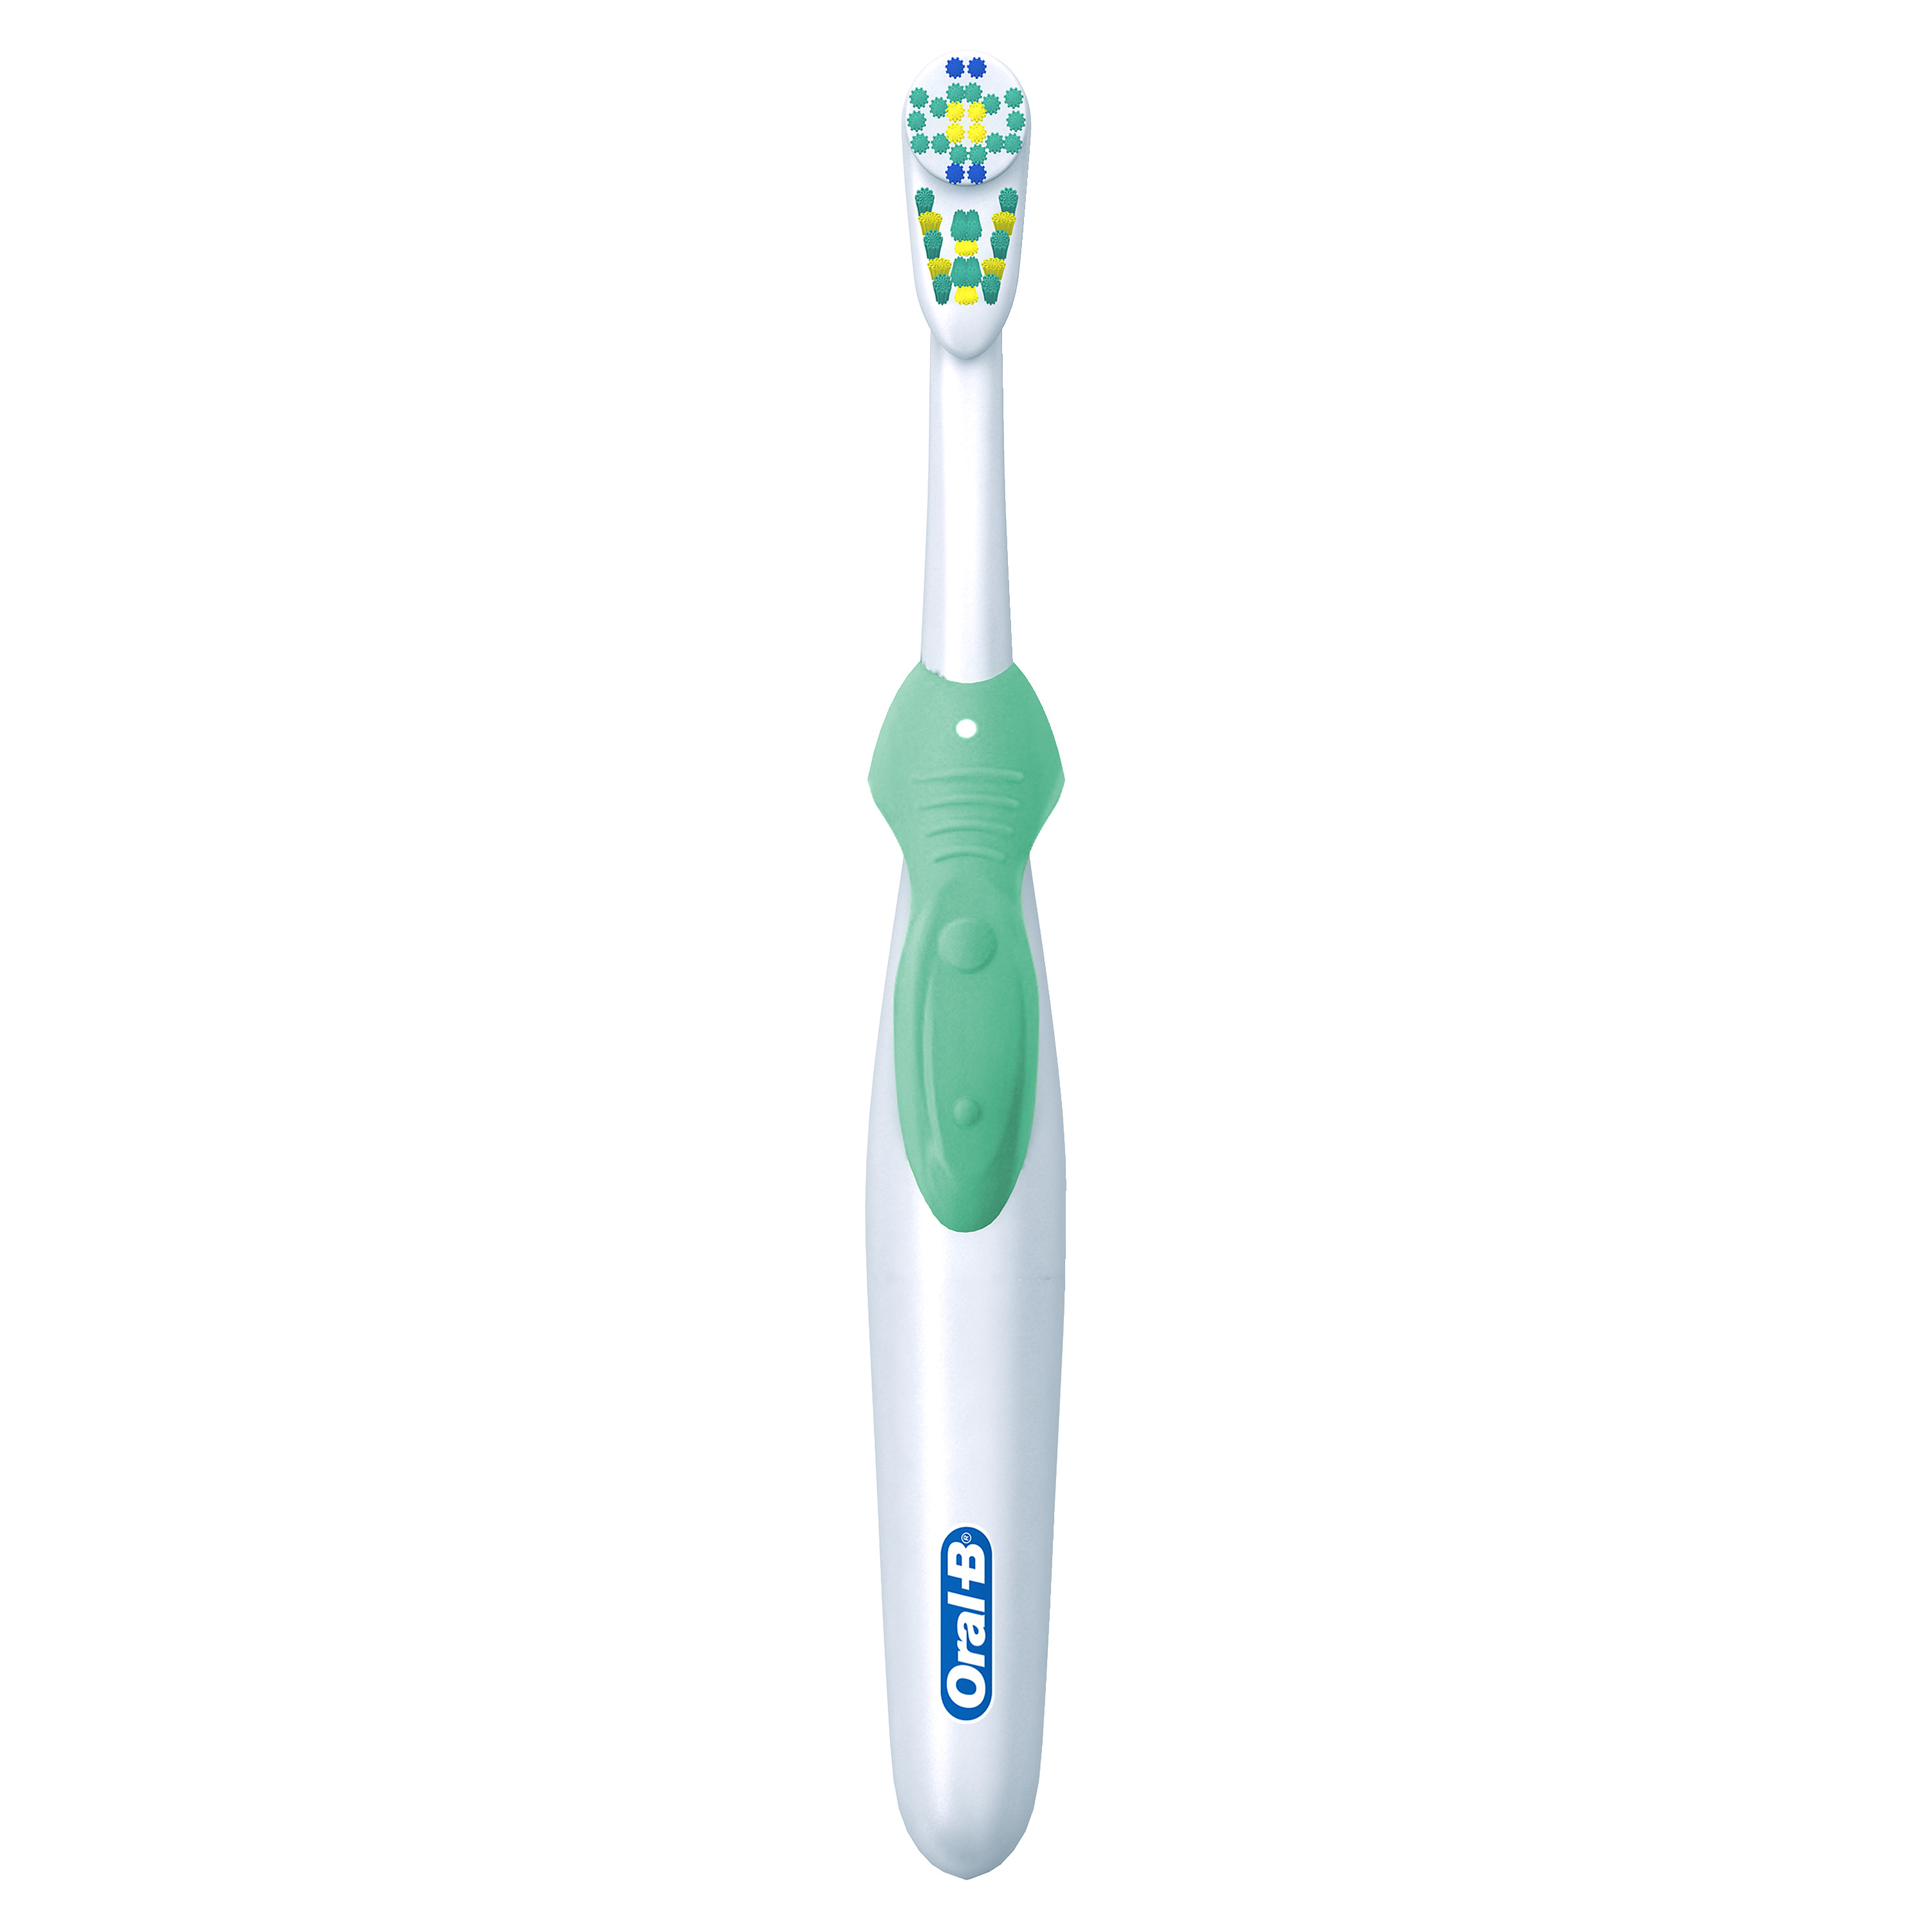 Oral-B Pro-Health Battery Power Toothbrush 1 Count, Colors May Vary - image 3 of 8